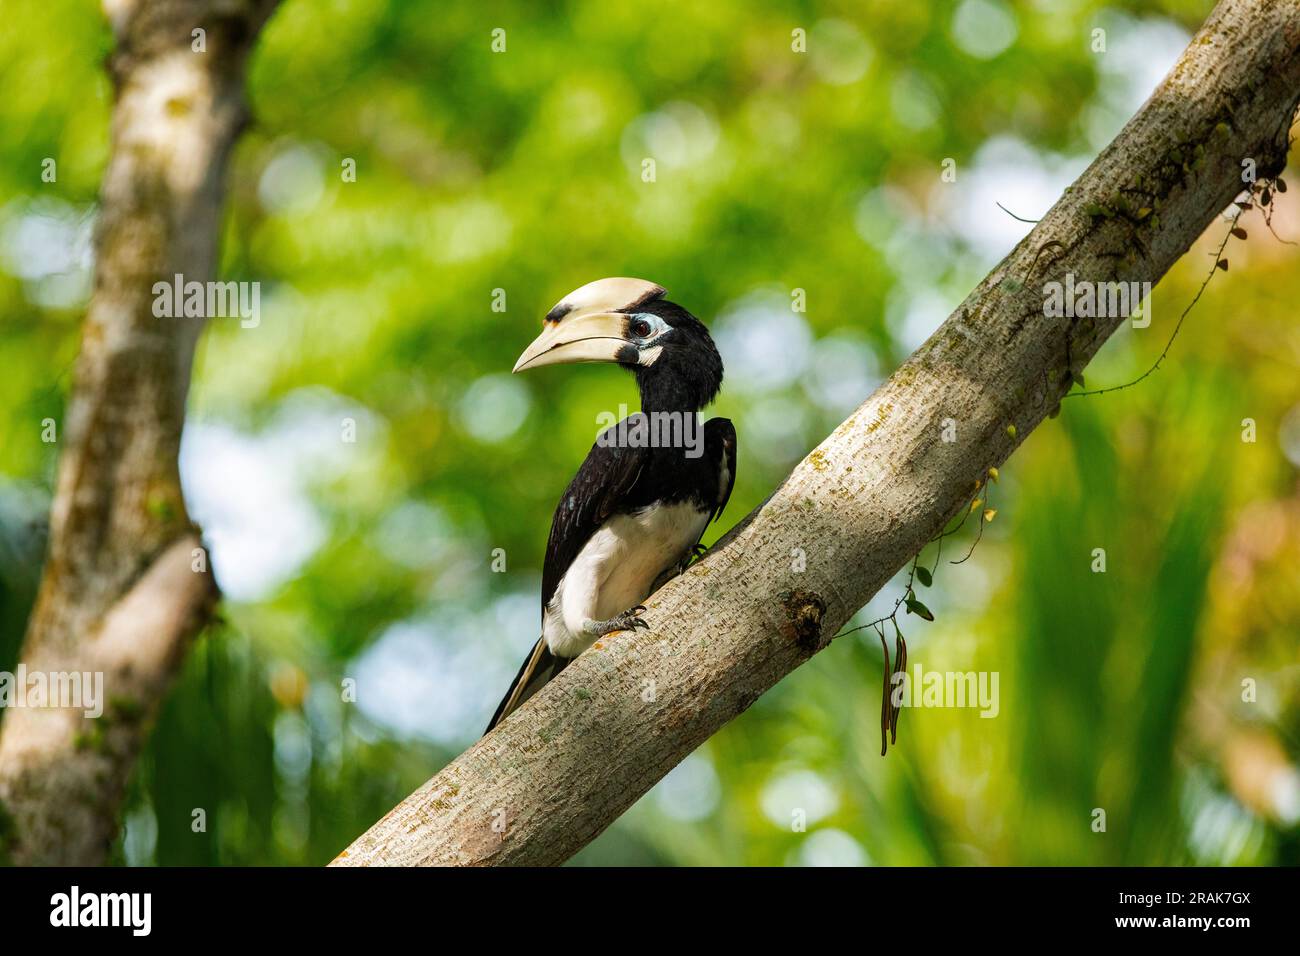 Juvenile male oriental pied hornbill foraging in a park tree, Singapore Stock Photo